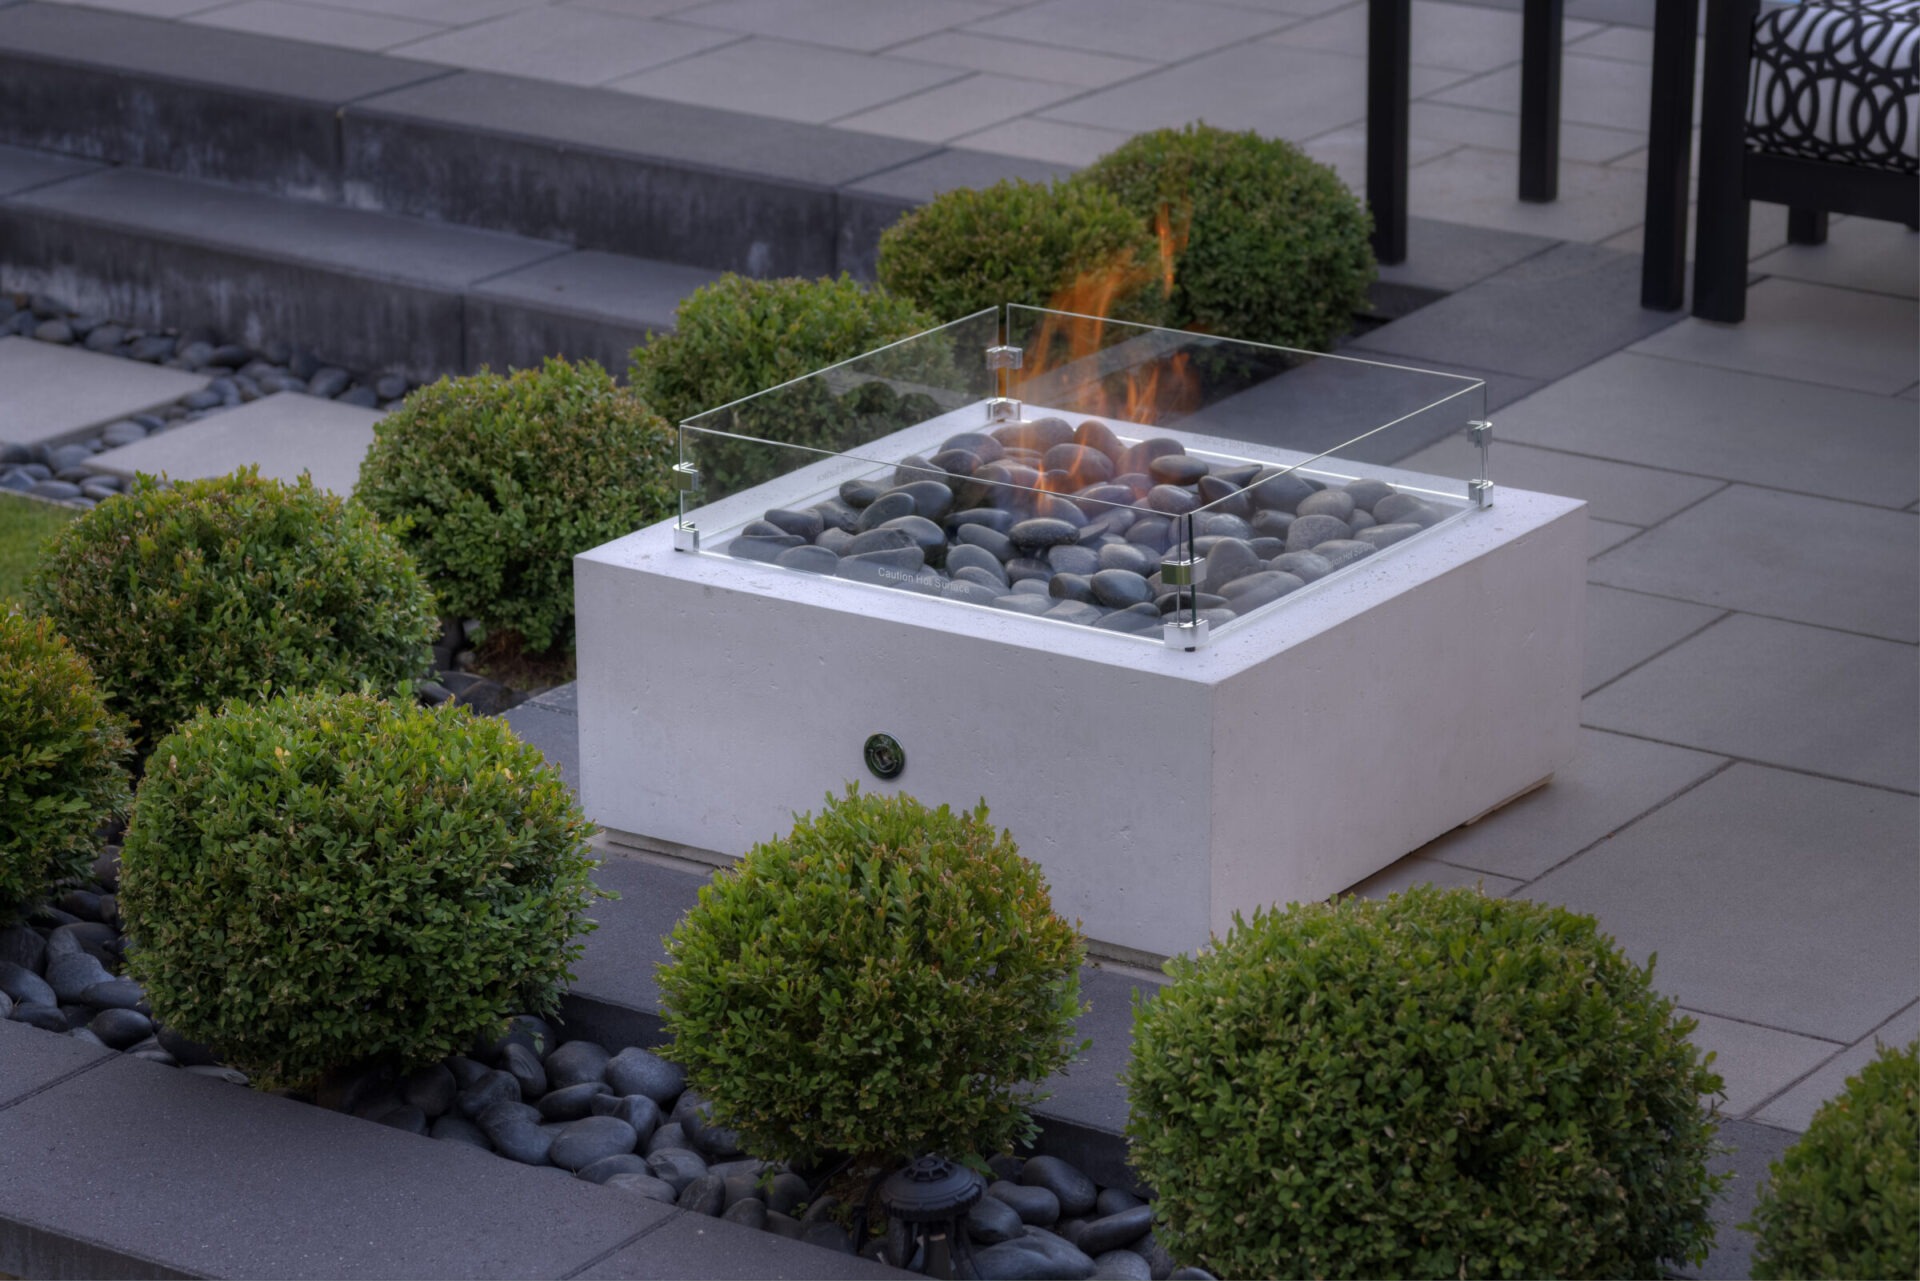 A modern outdoor gas fire pit with a glass shield surrounded by decorative round bushes and smooth gray stones on a patio.